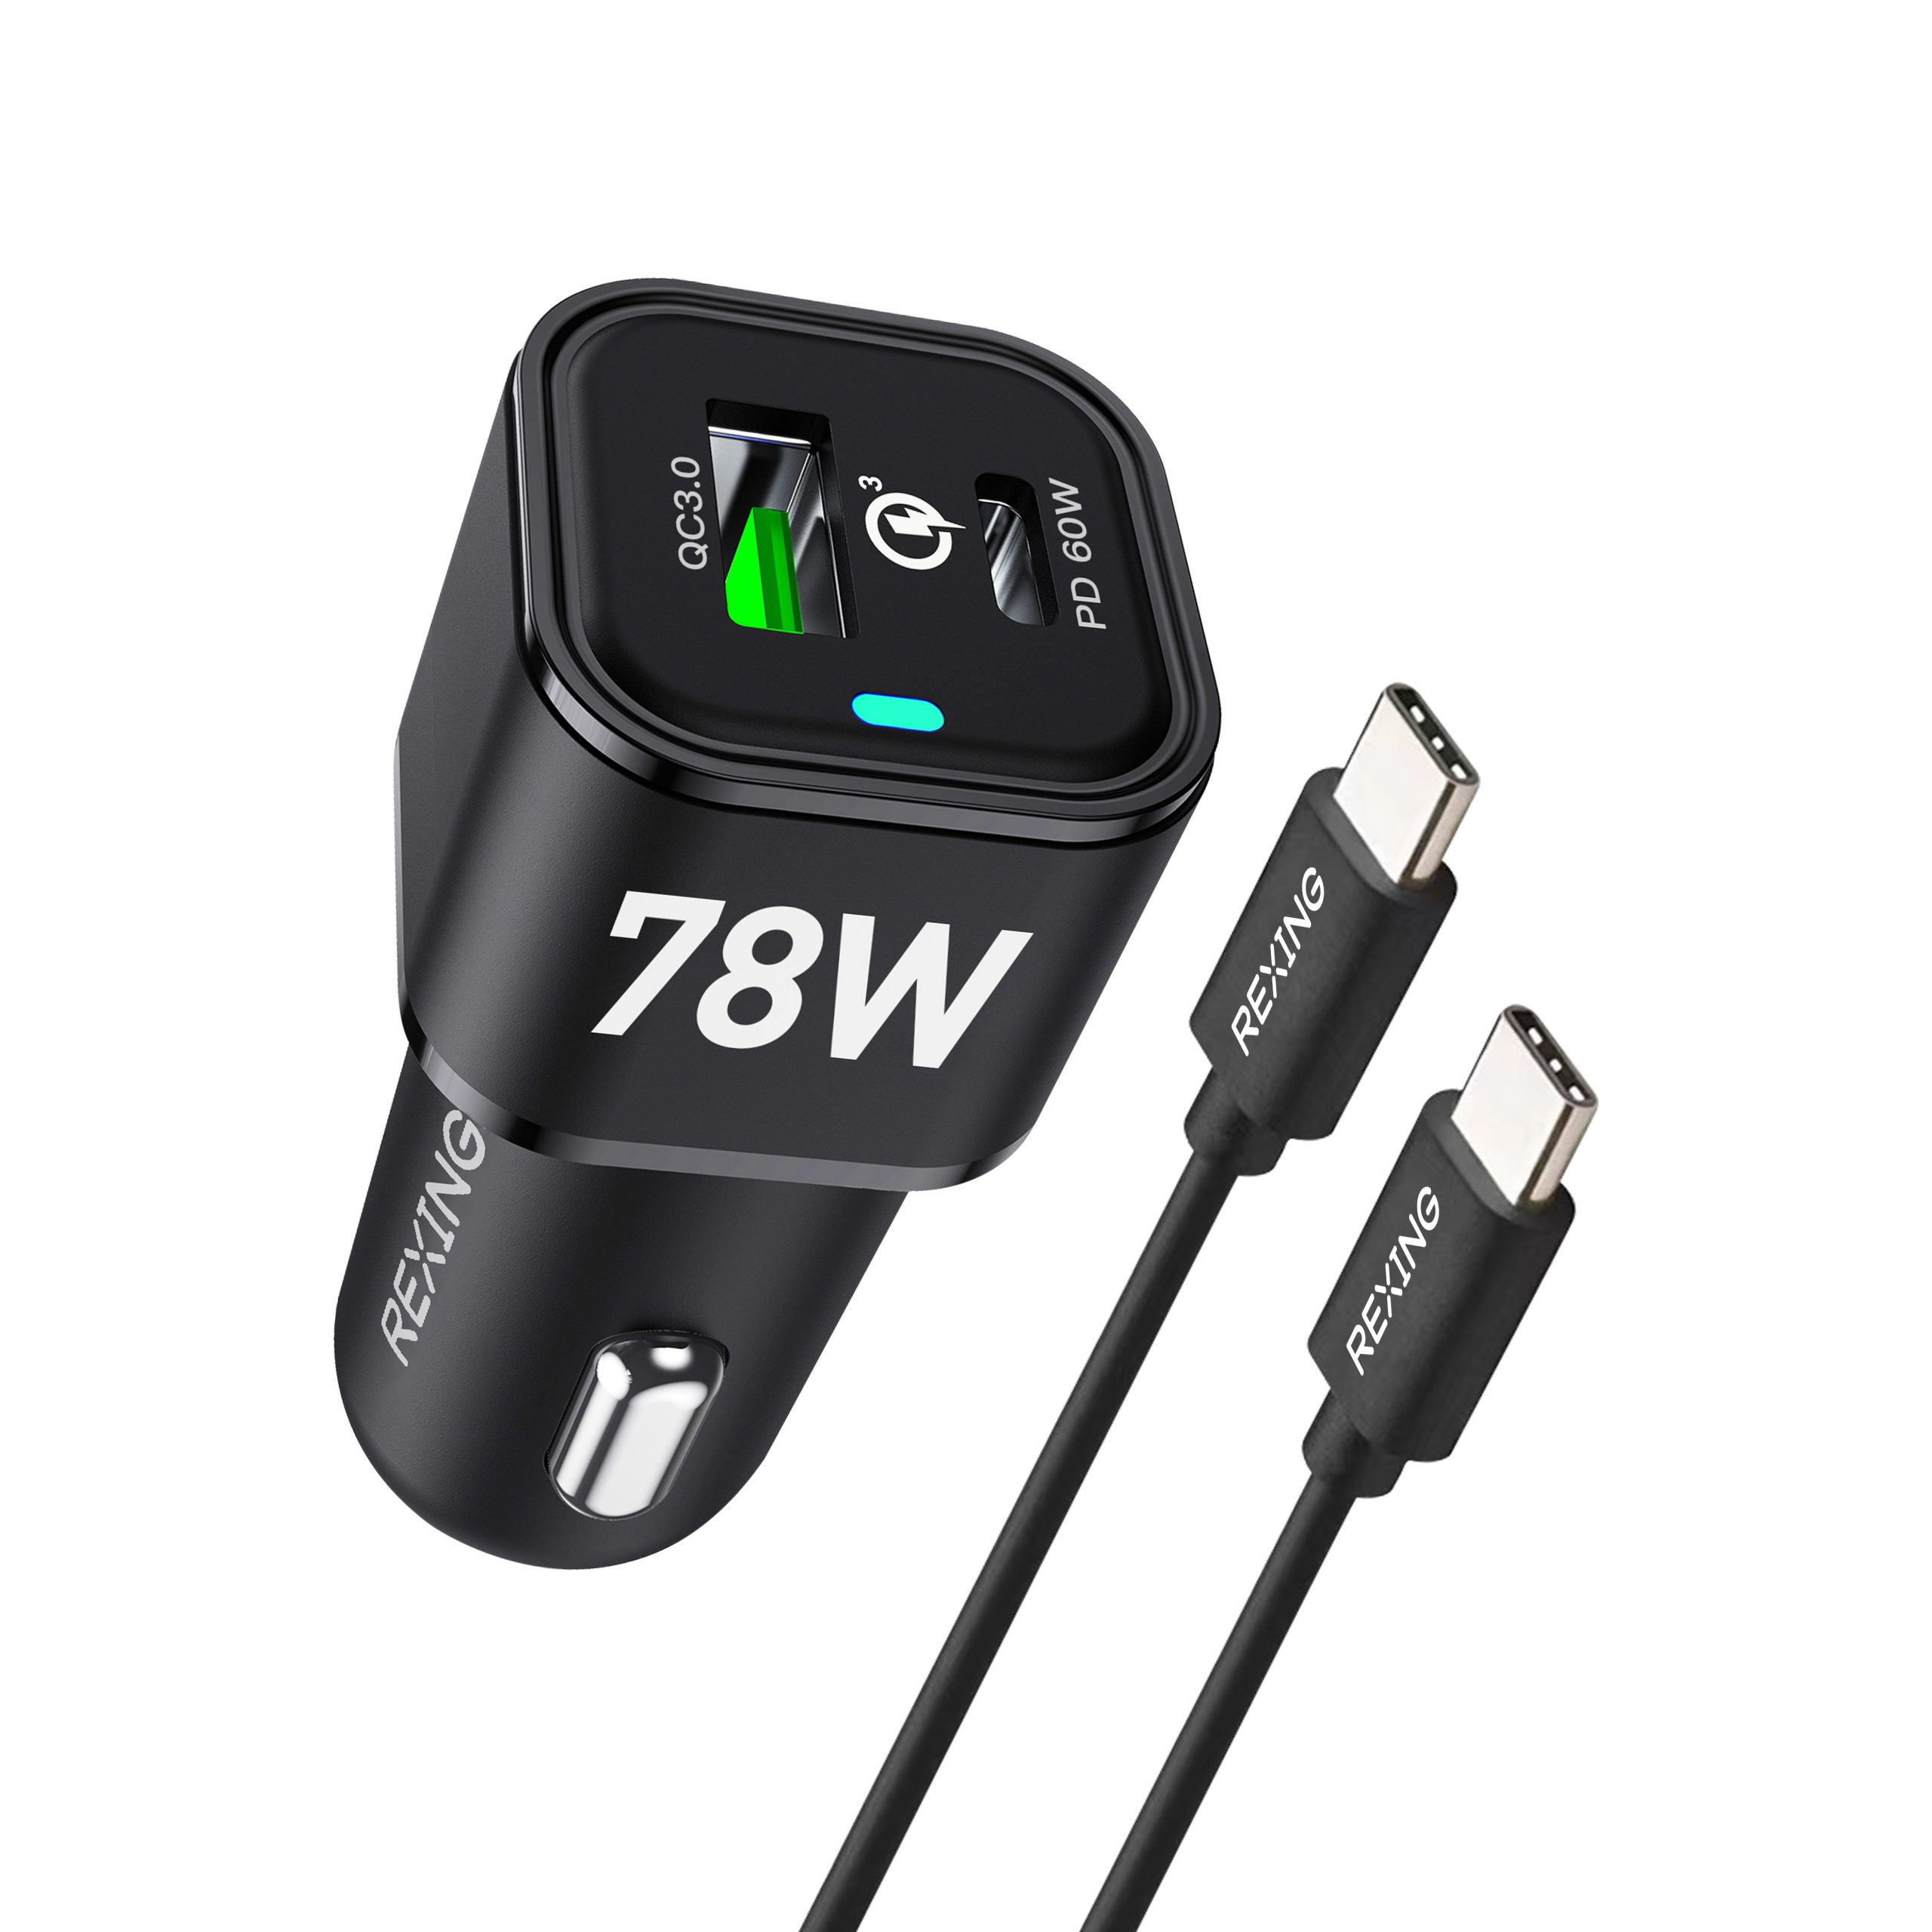 REXING JETSPEED Black 78W PowerDelivery+ USB-C/USB Car Charger with Cables